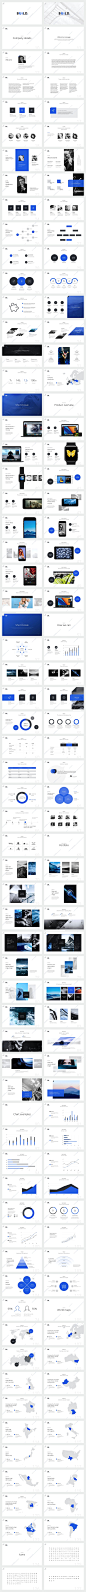 BUILD PowerPoint Template - Presentations - 15